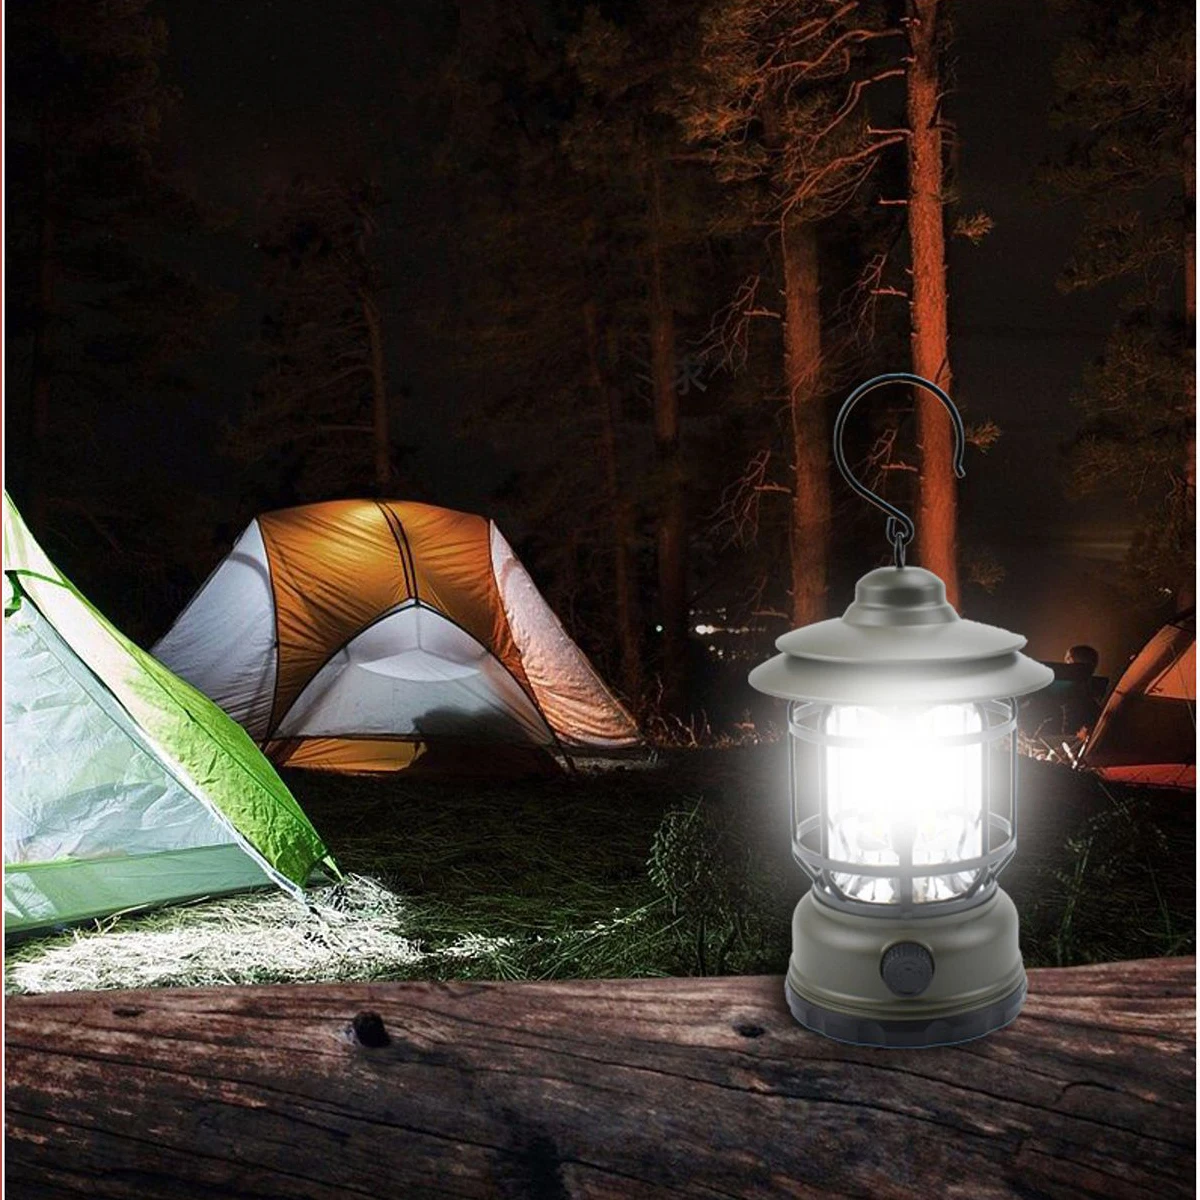 LED Camping Lantern,Rechargeable Retro Metal Camping Light,Battery Powered  Hanging Hand Crank Candle Lamp ,Portable Waterpoor Outdoor Tent Bulb,  Emergency Light - China Outdoor Camping Lantern, Outdoor Camping Lamp